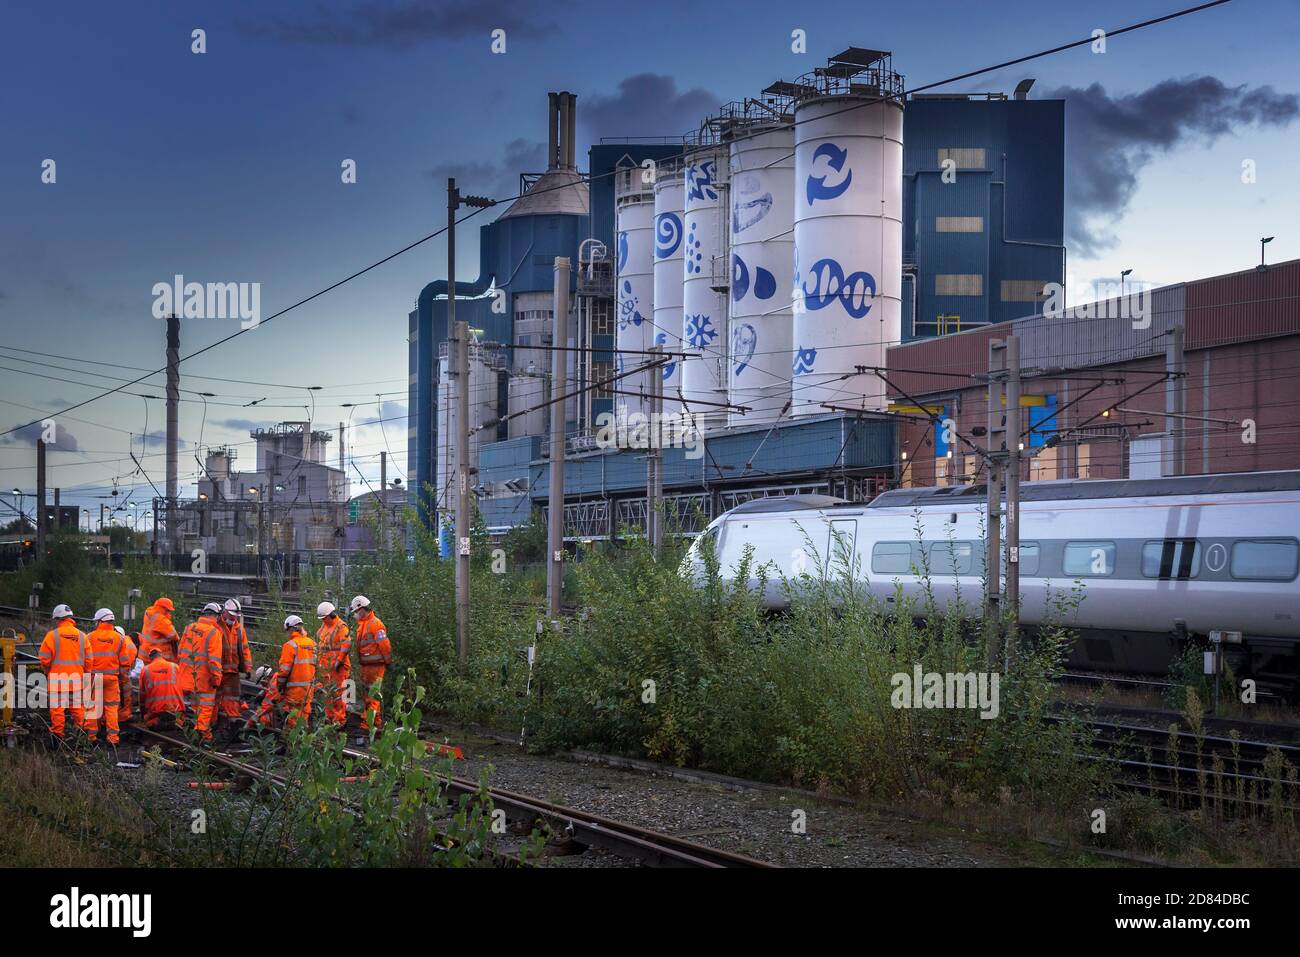 Network Rail track workers busy on the West Coast Main Line at Warrington Bank Quay station with the Unilever soaps factory in the early evening. Stock Photo